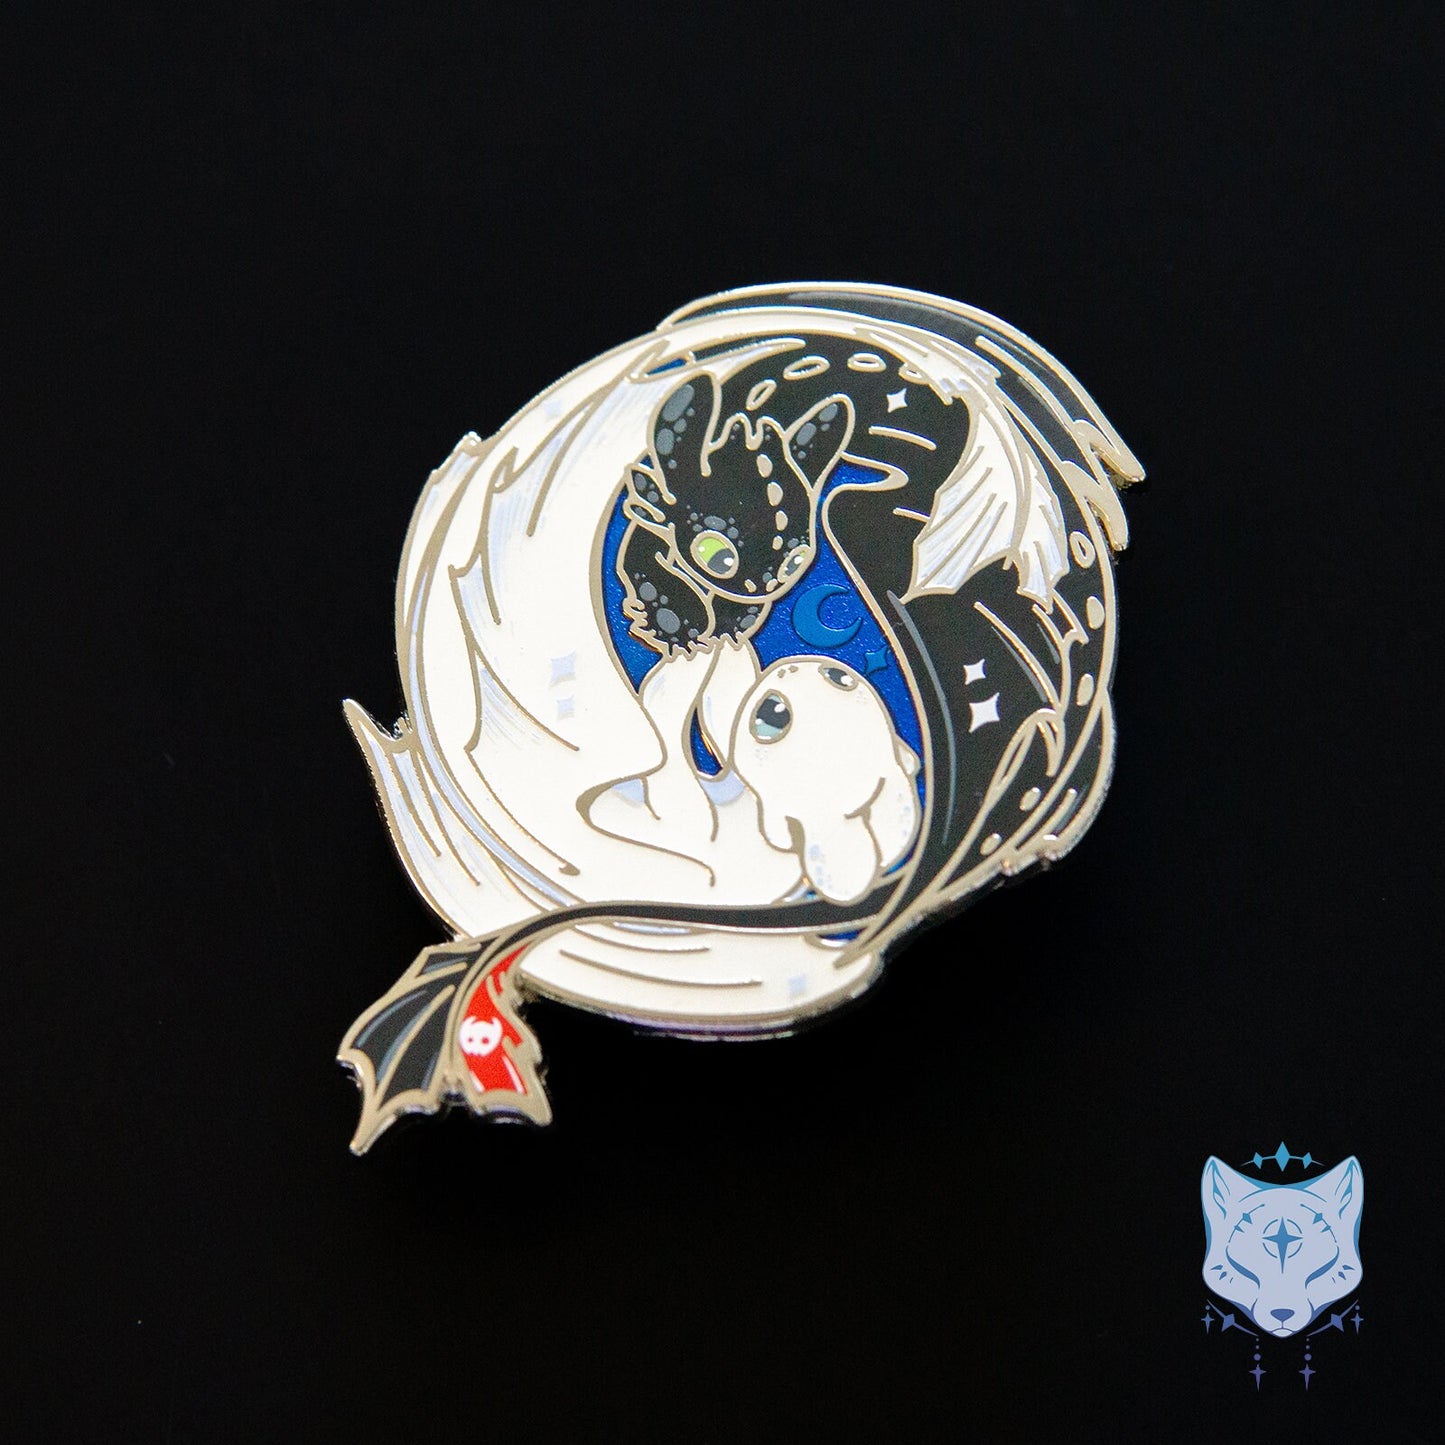 HTTYD "Flight of Dragons" - LE 110 Glow-In-The-Dark 2.5" pin